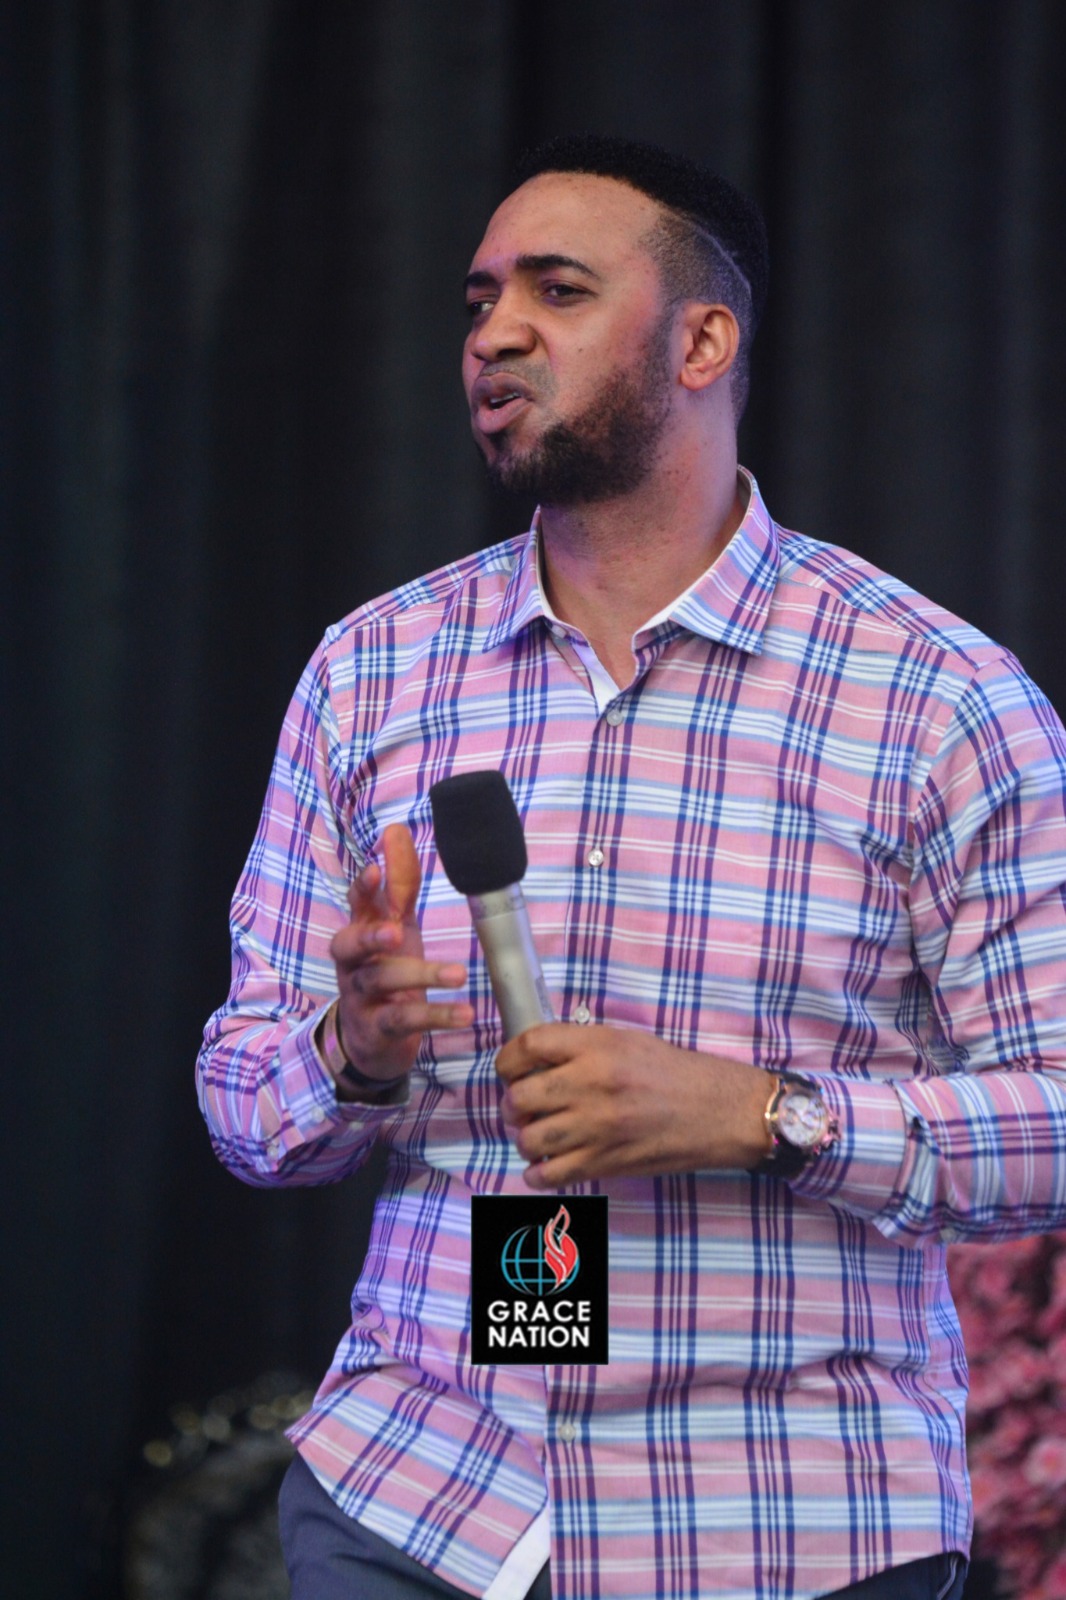 Grace Nation: Despite You Are Born Again, You Still Need to Settle Issues – Dr Chris Okafor